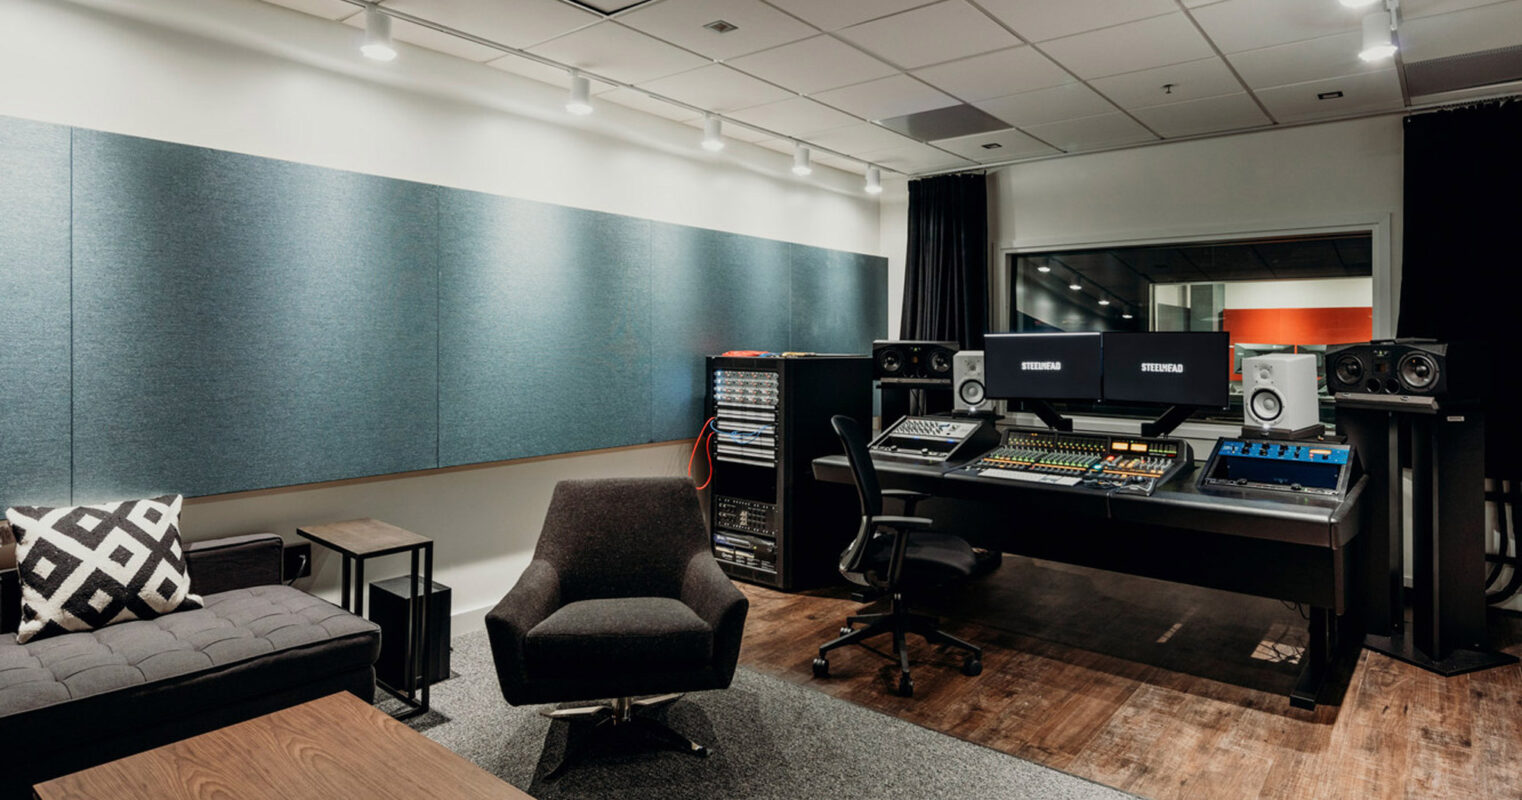 Modern recording studio with acoustic panels on walls, mixing console center, professional monitors on stands, and an ergonomic chair. Wood flooring transitions to carpet, enhancing the room's acoustics, with a cozy sofa and patterned cushions to the side for guests.